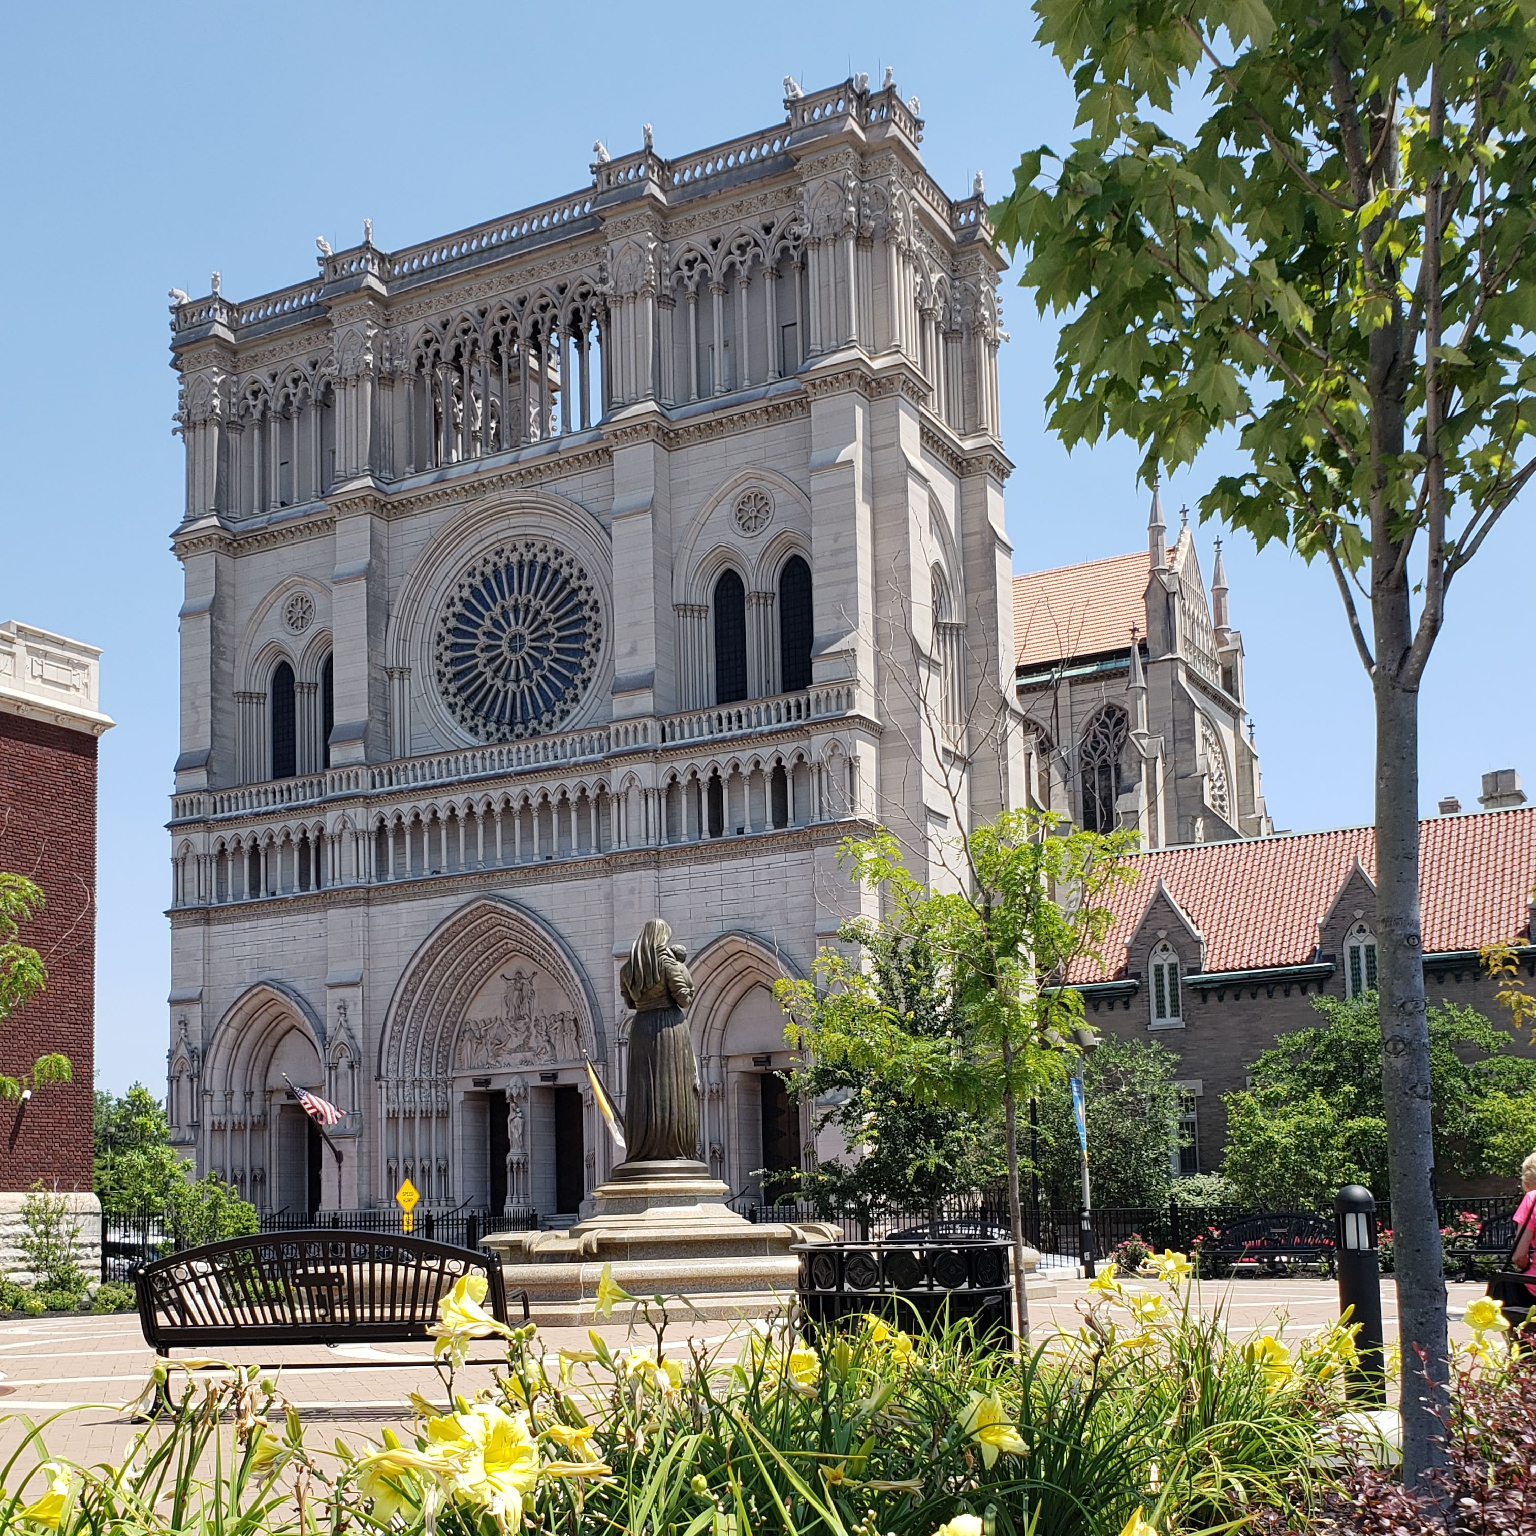 The facade of St. Mary's Basilica in Covington, KY, was modeled after Notre Dame of Paris, but the two towers were never completed.